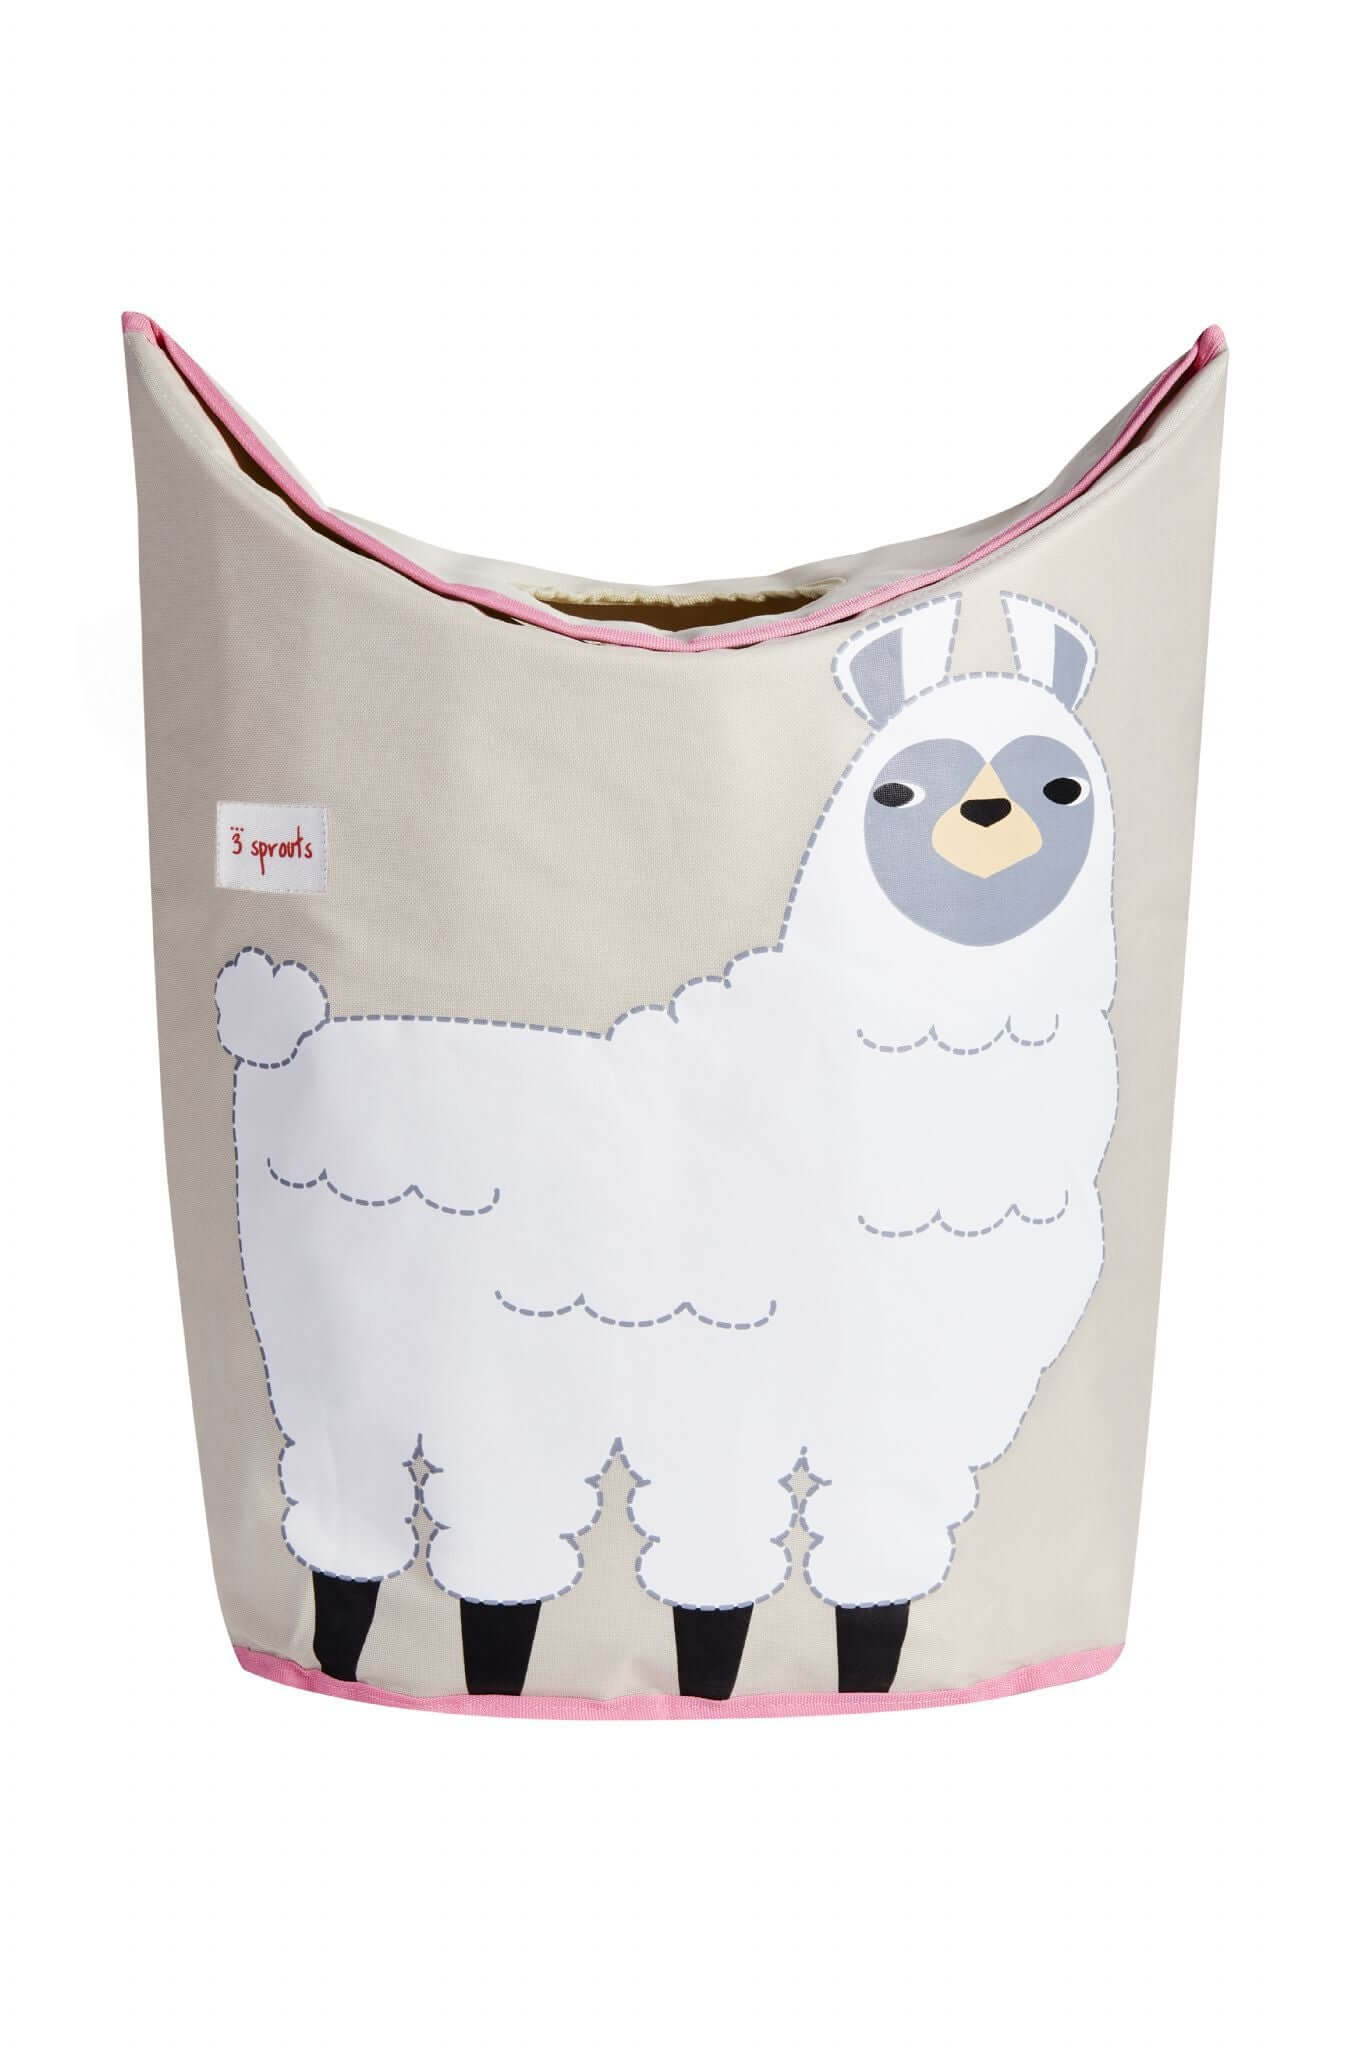 3 Sprouts Laundry Hamper - Llama furniture storage Earthlets